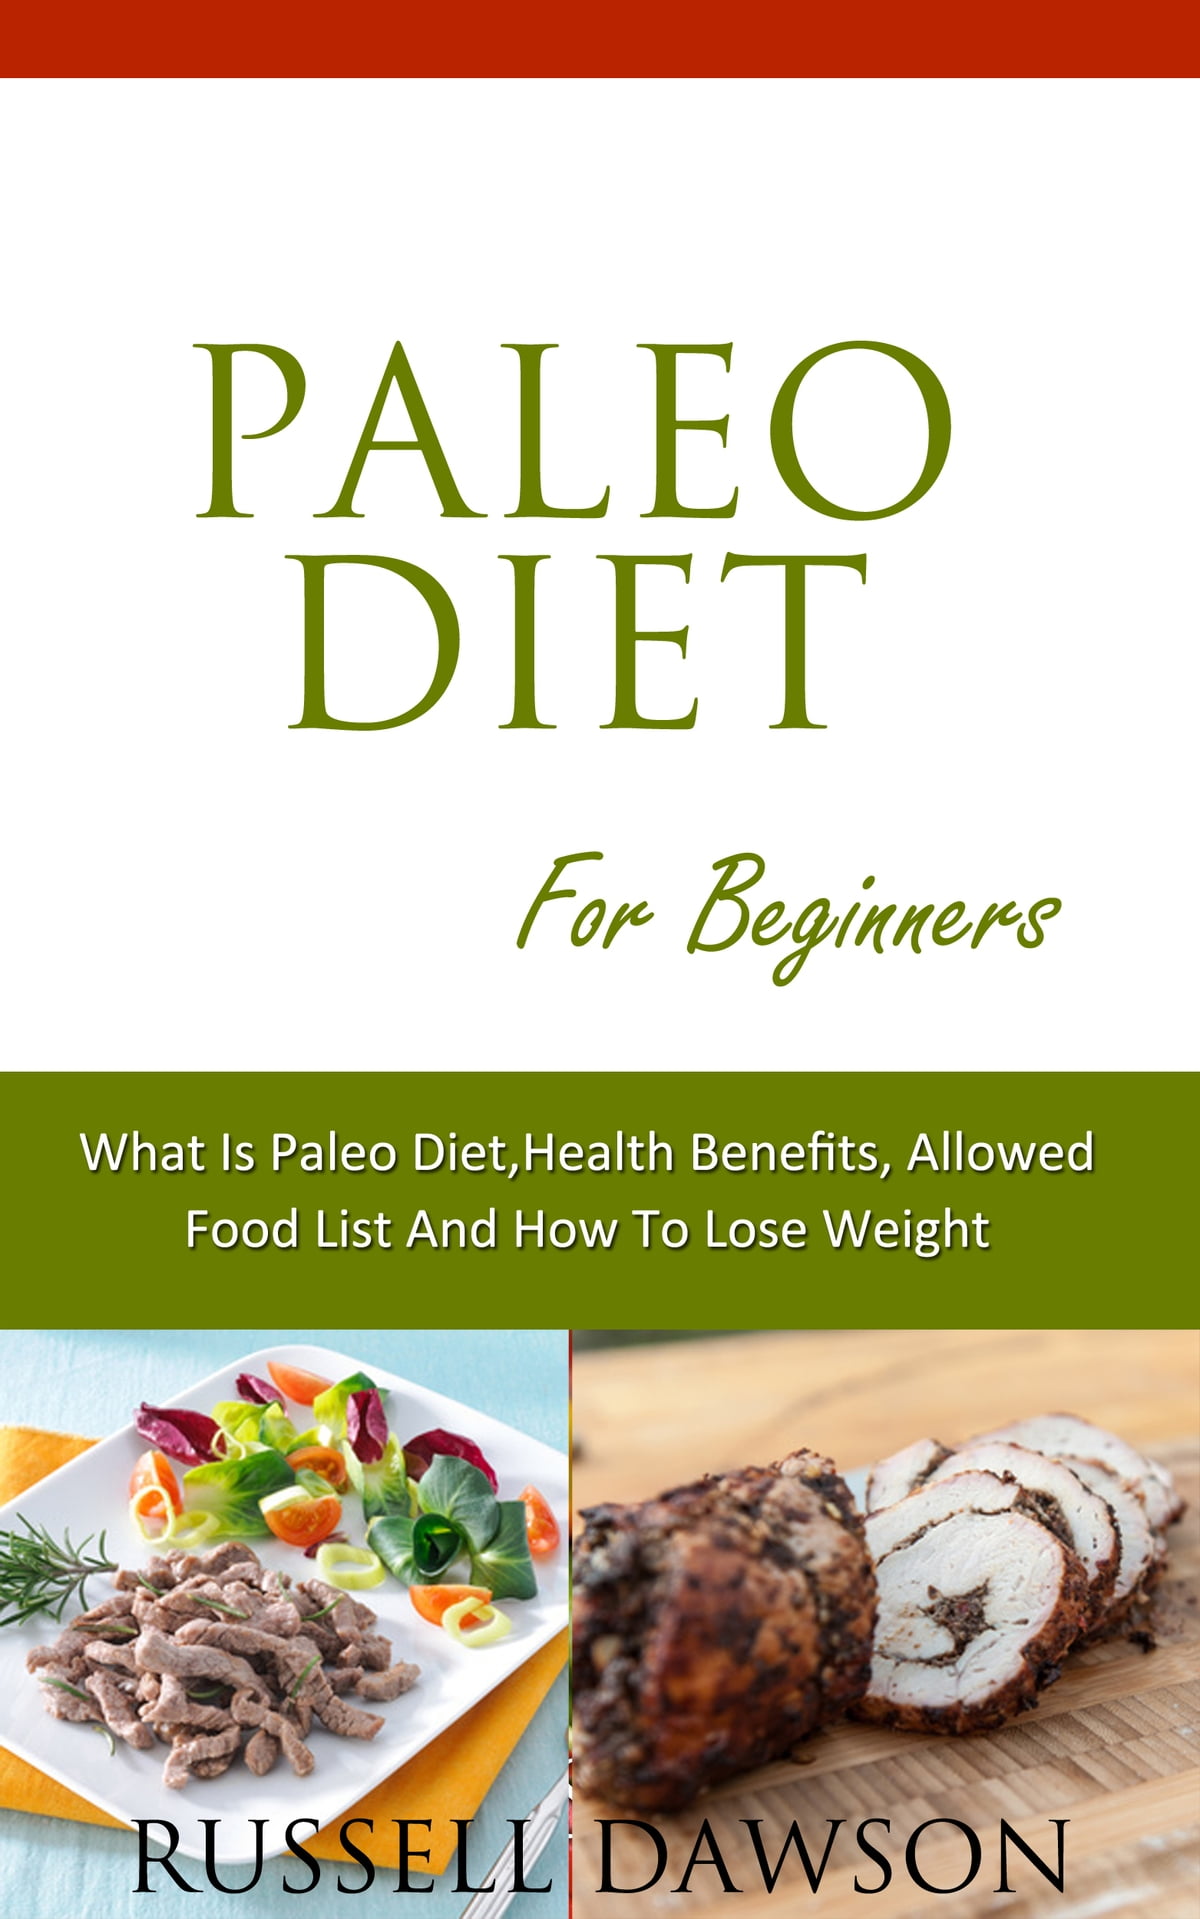 Is the Paleo Diet Healthy?